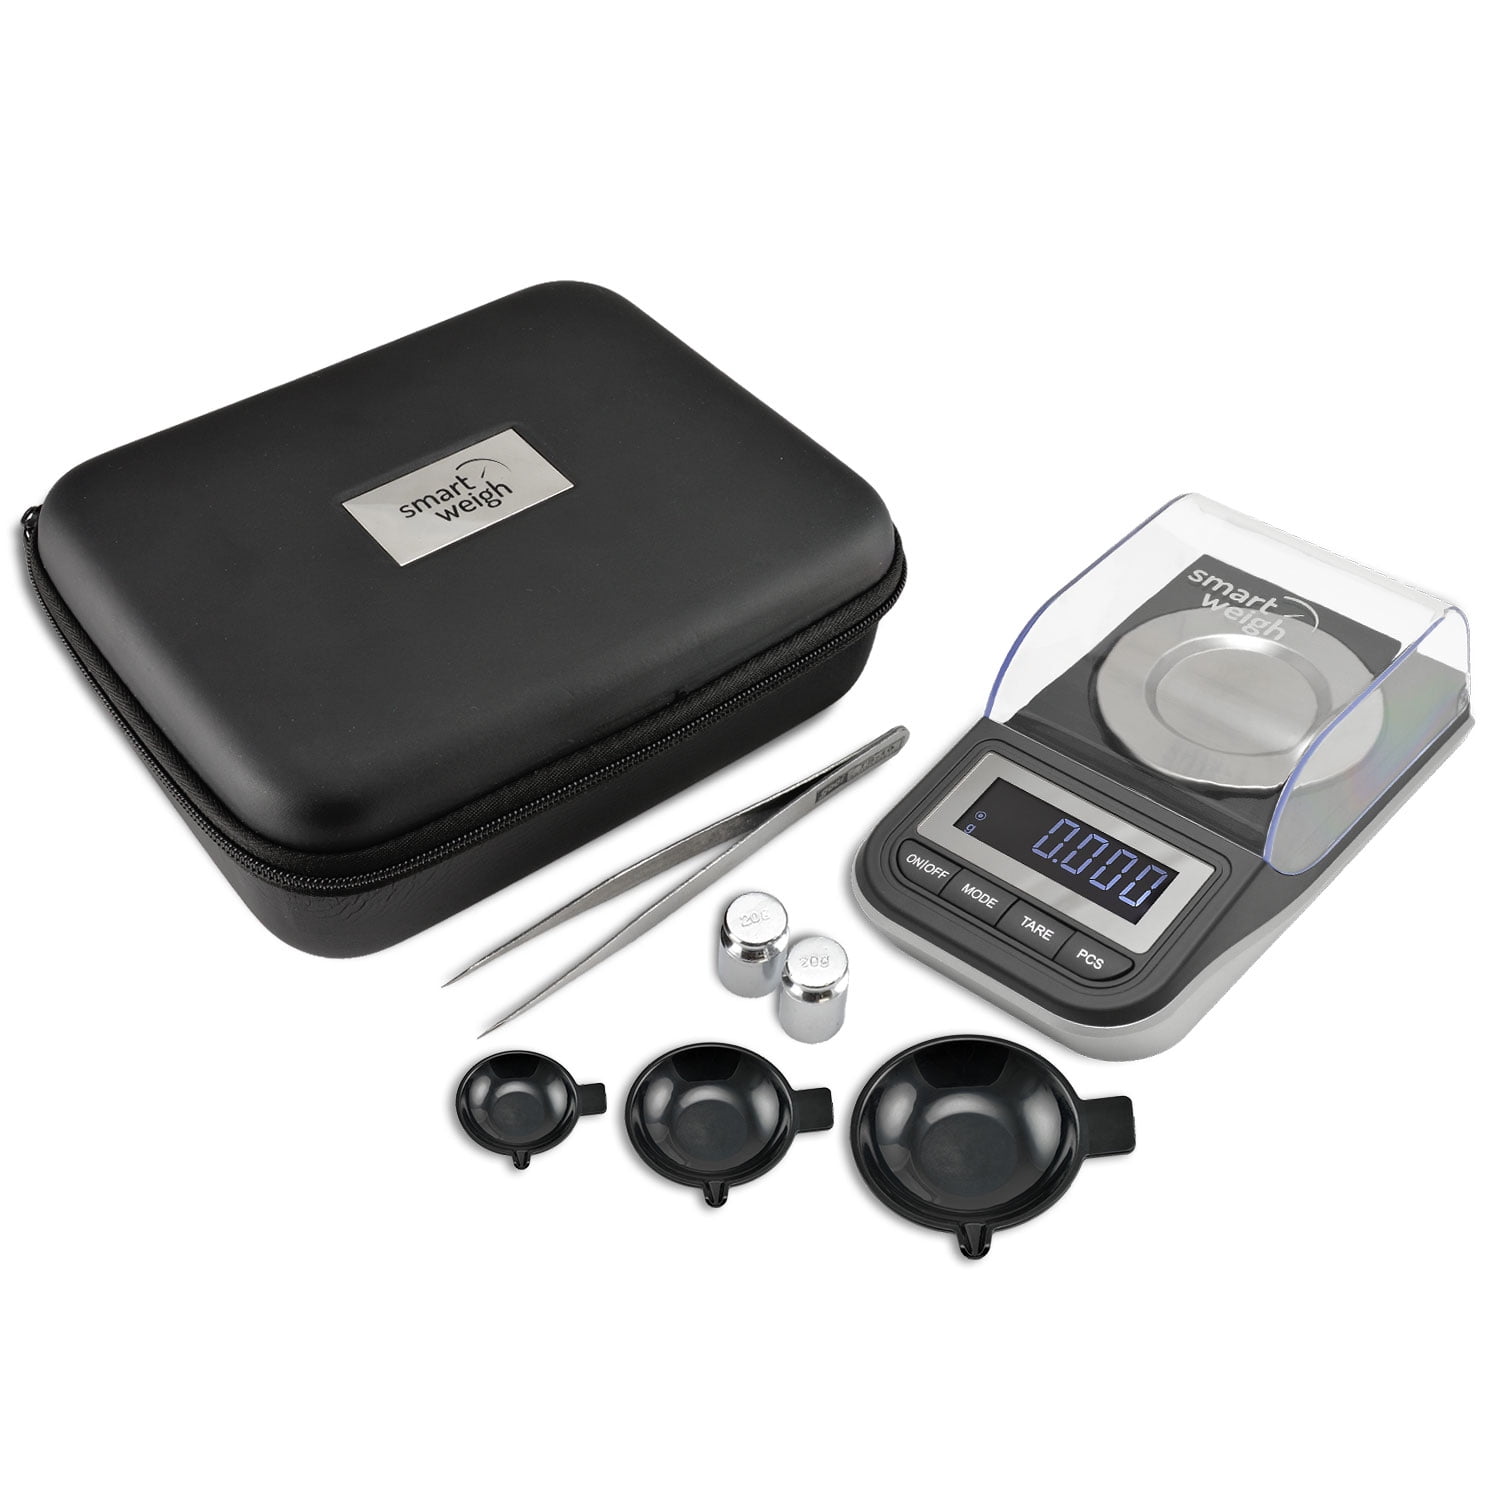 Smart Weigh 50g x 0.001 Grams, Premium High Precision Digital Milligram  Scale, Includes Tweezers, Calibration Weights,Three Weighing Pans and Case